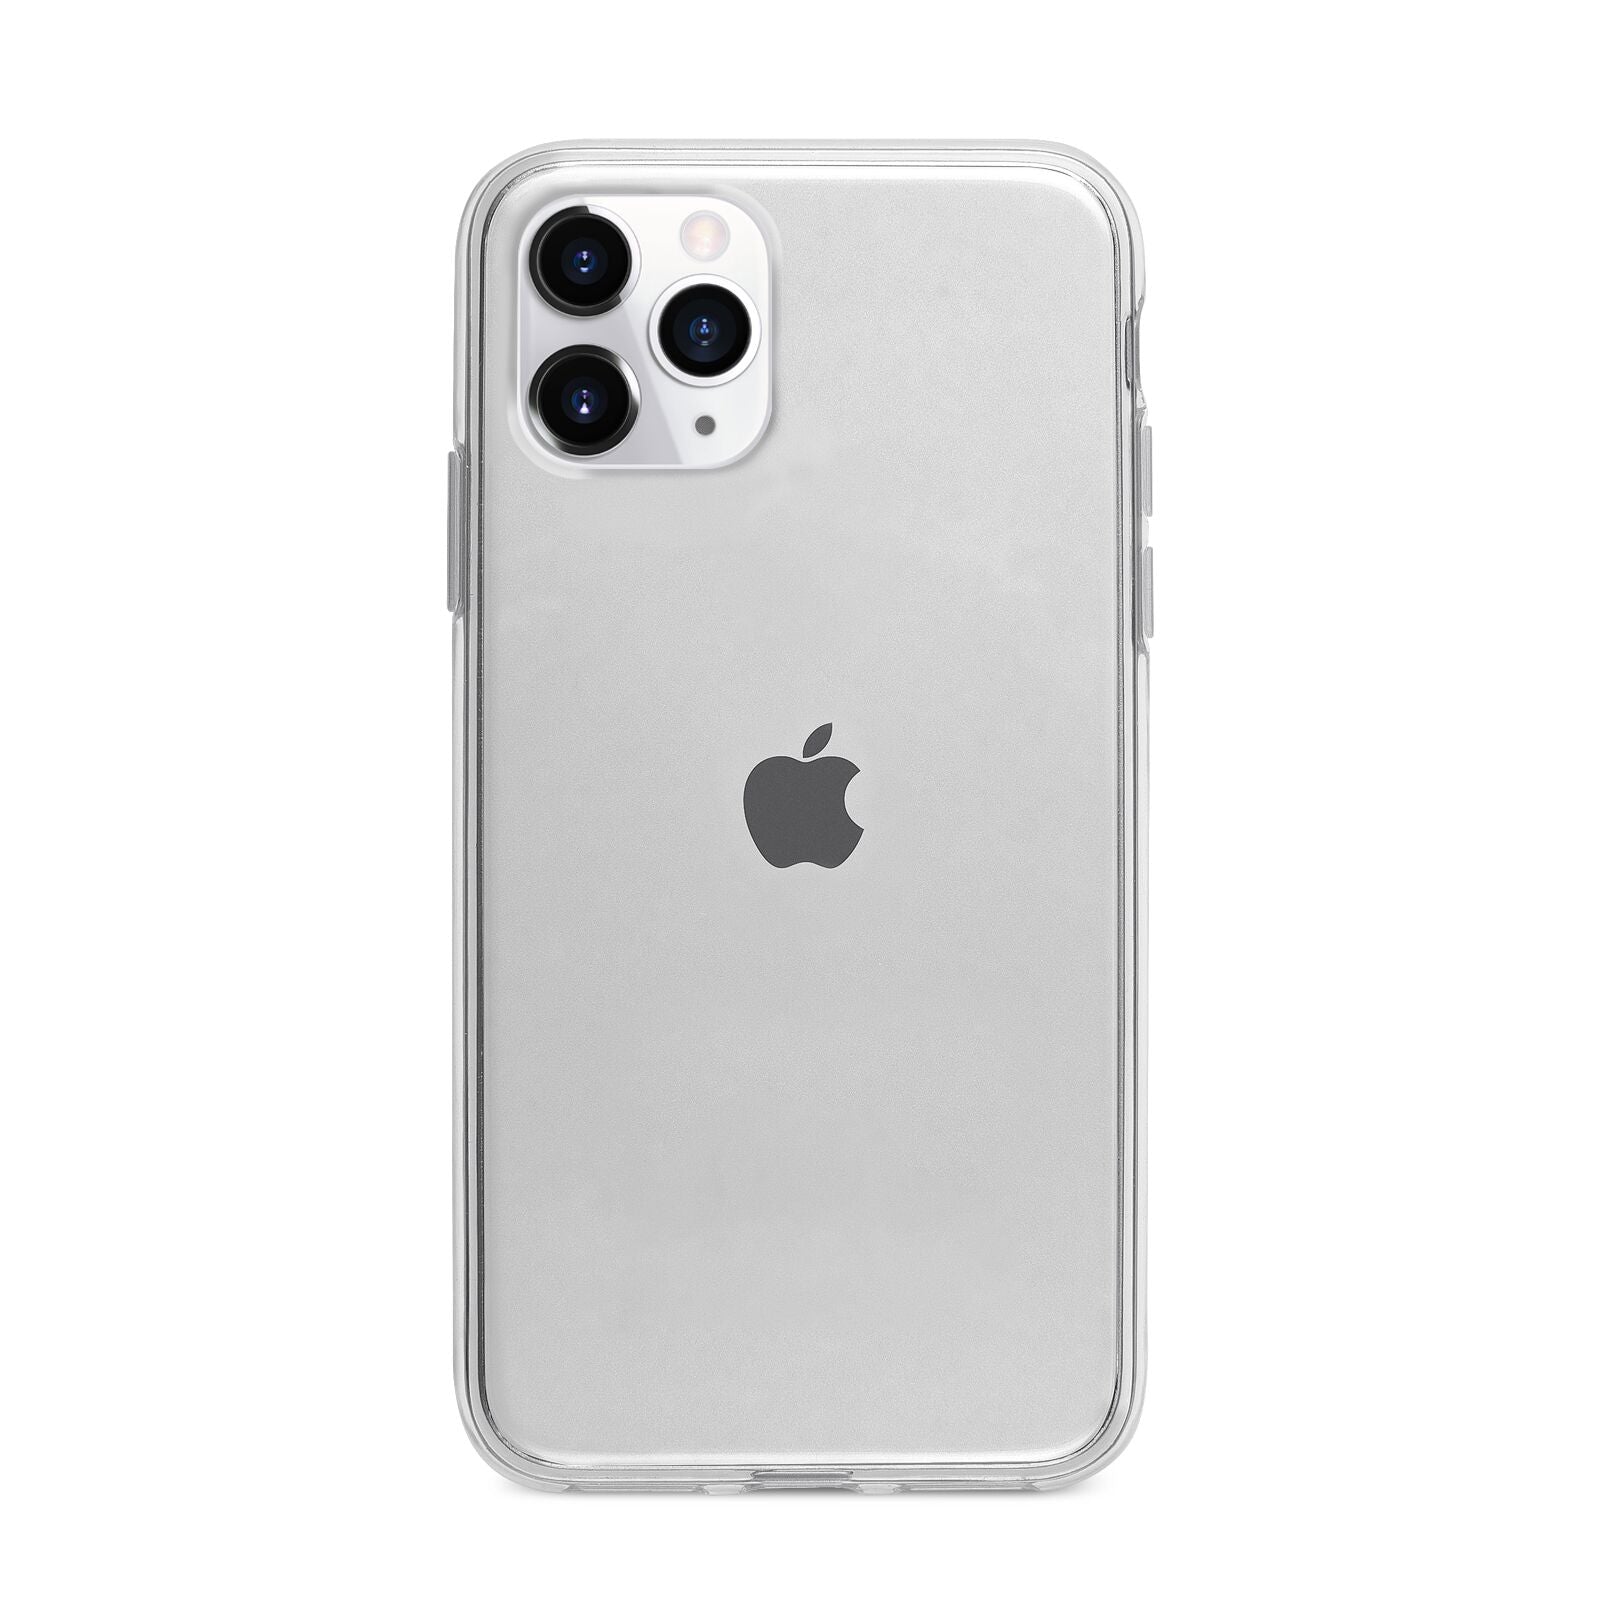 Clear Apple iPhone 11 Pro in Silver with Bumper Case